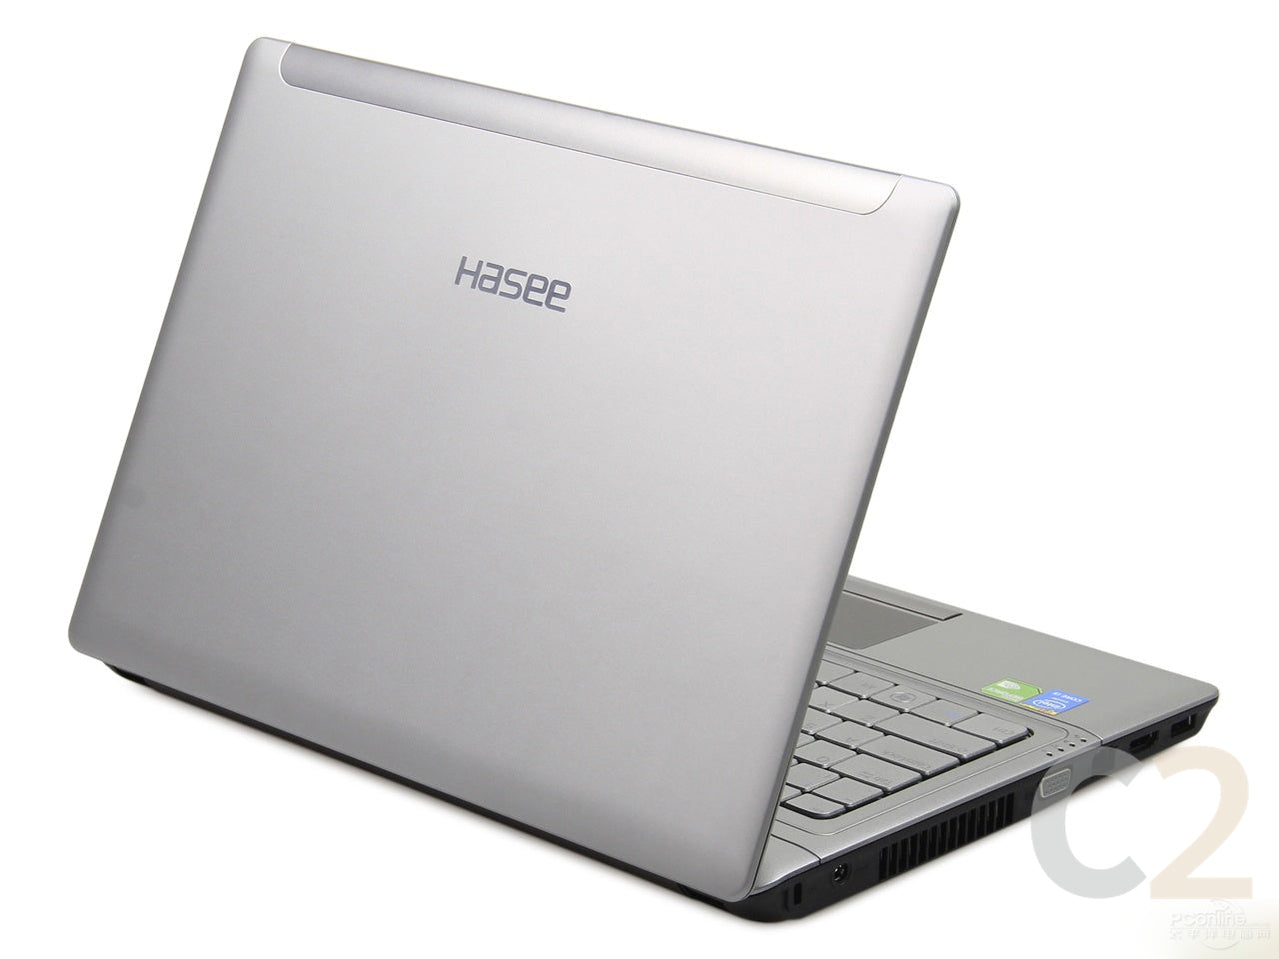 (二手) HASEE GOD OF WAR(神舟-戰神) K540D i7-4720M 4G NA 500G GT 940 2G 14" 1920×1080  Entry Gaming Laptop 入門遊戲本 90% NEW - C2 Computer